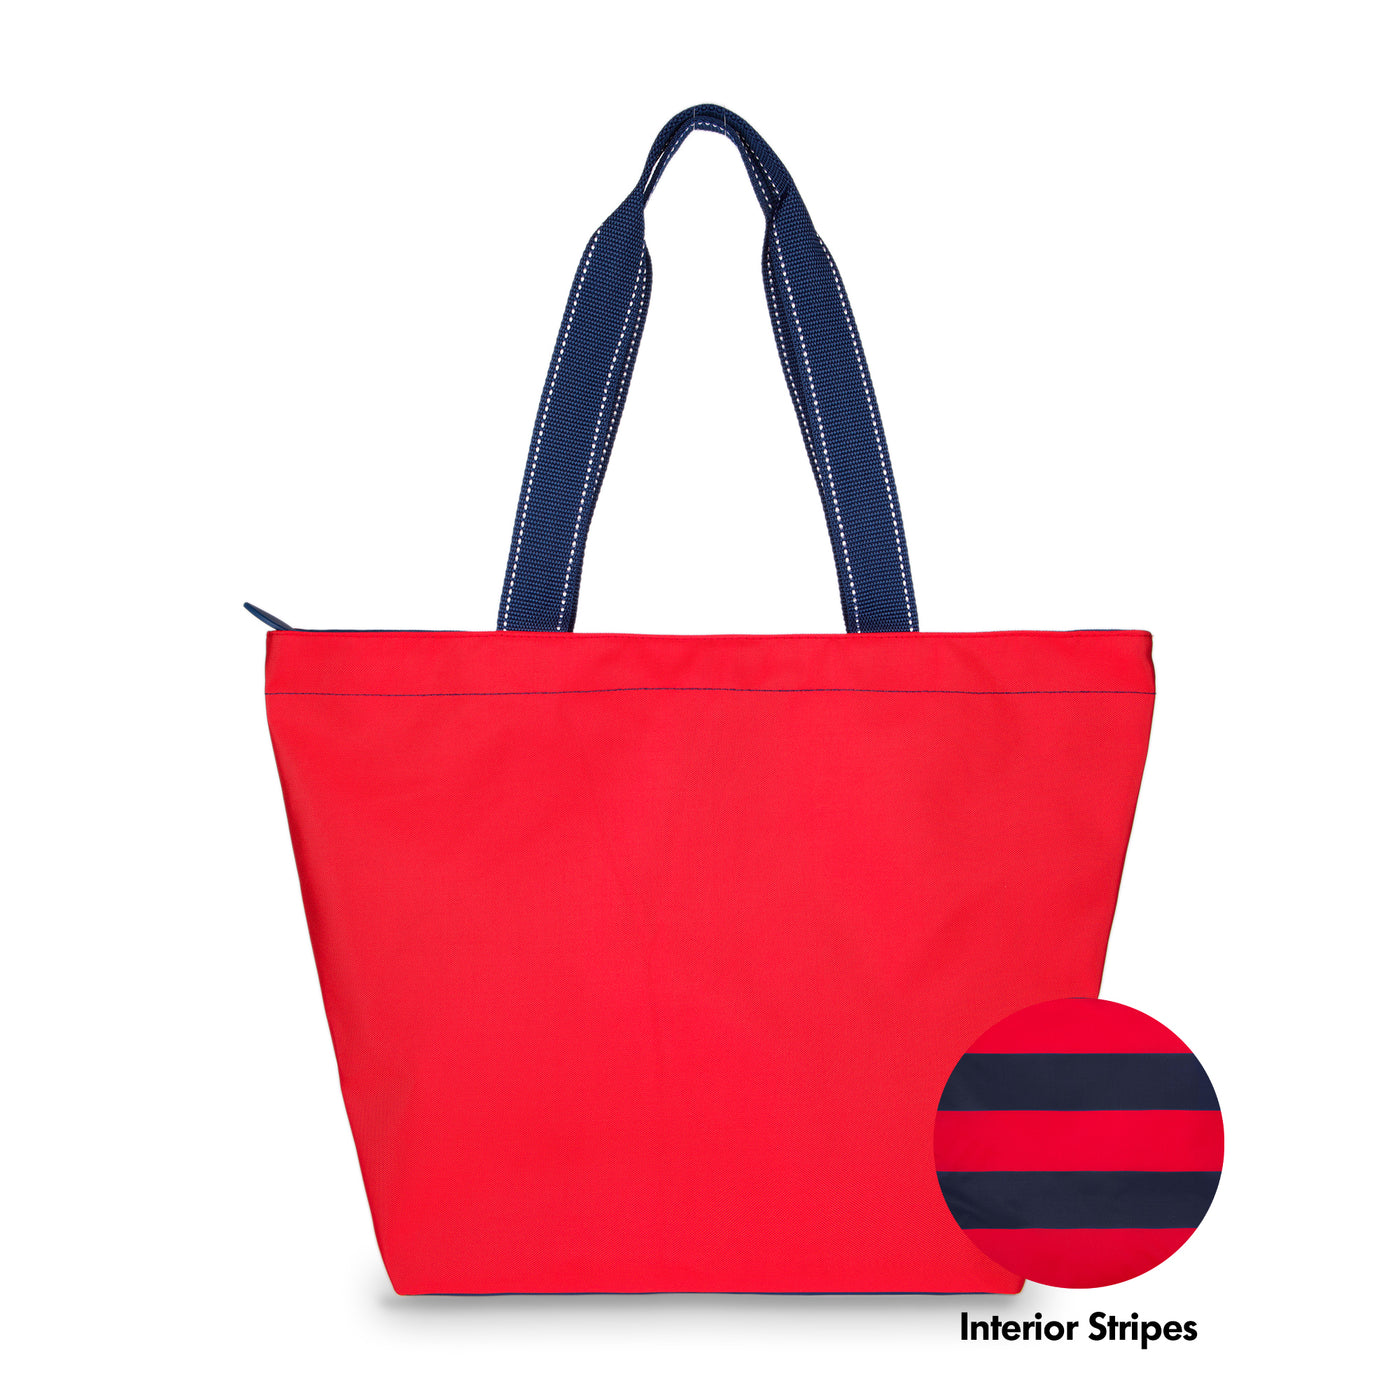 red nylon tote bag with navy straps with a swatch next to it to show that it has navy and red interior stripes